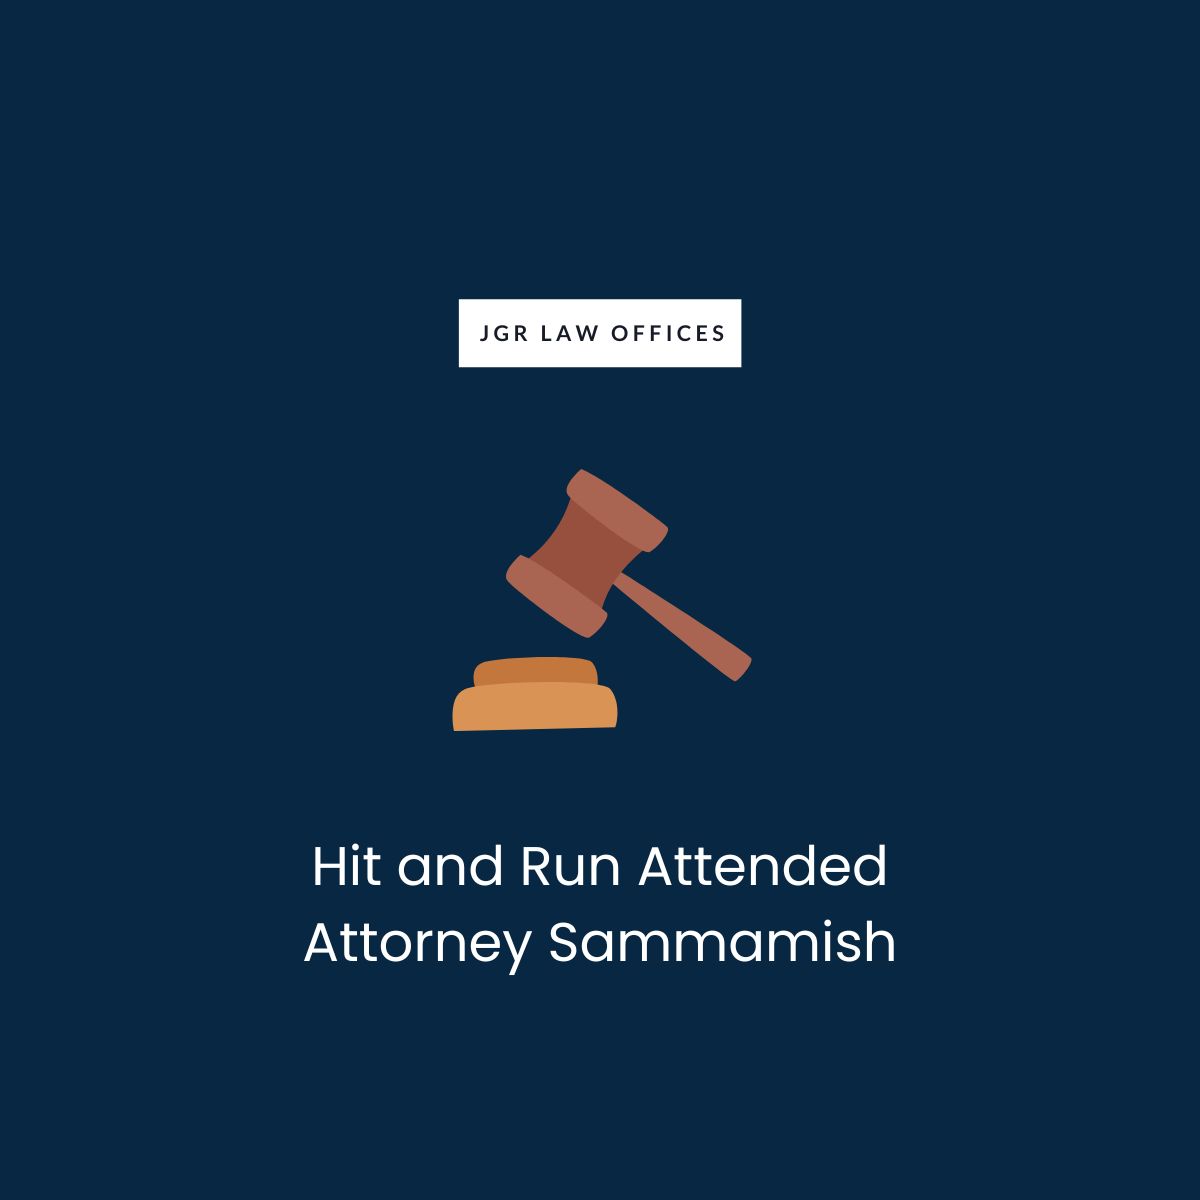 Hit and Run Attended Attorney Sammamish